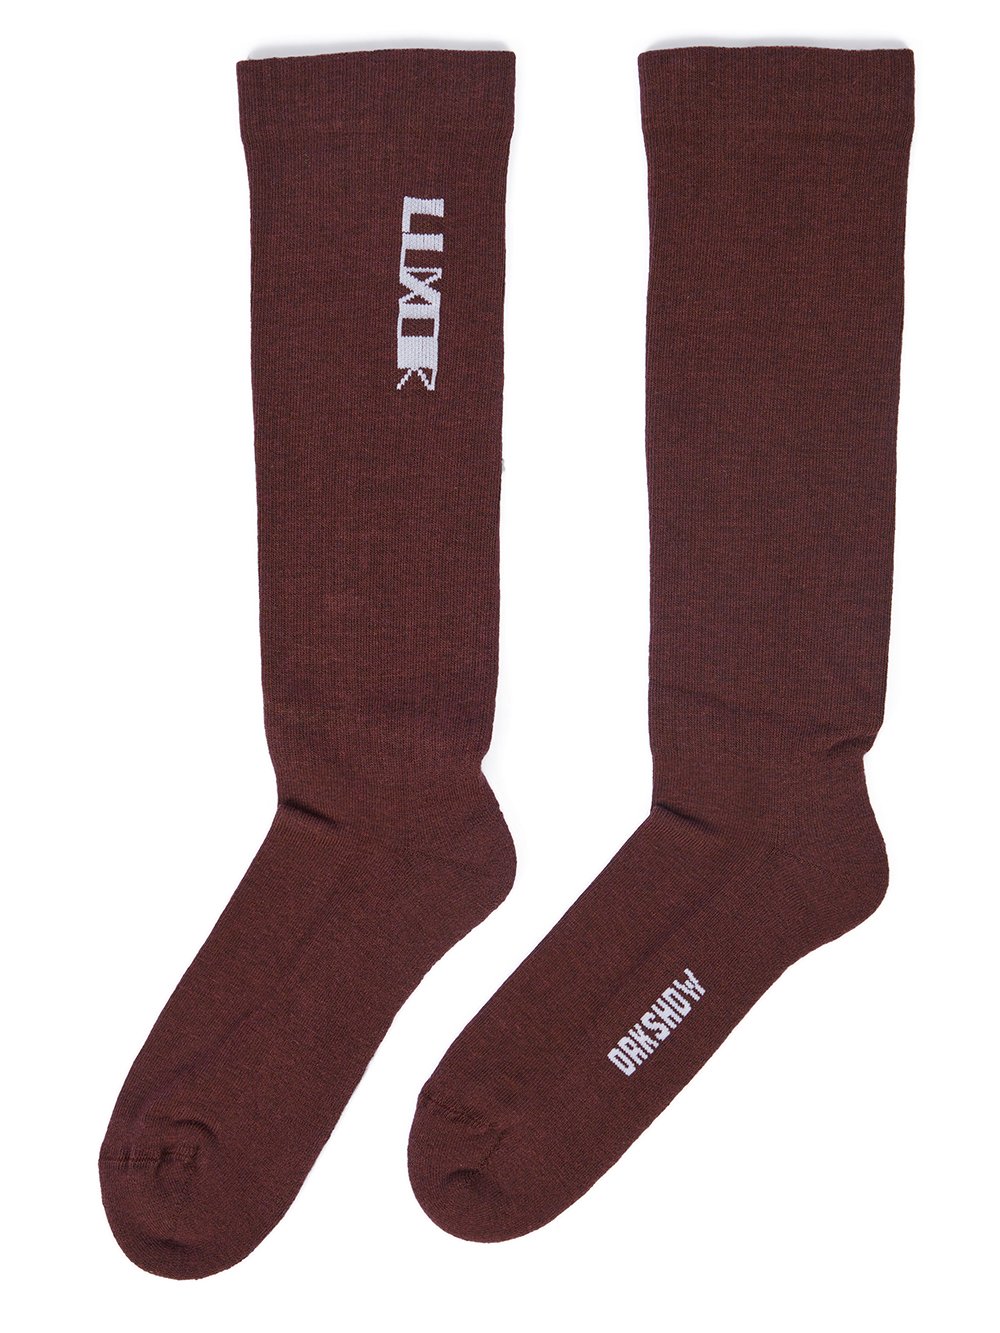 RICK OWENS FW23 LUXOR LUXOR SOCKS IN MAUVE AND MILK COTTON KNIT